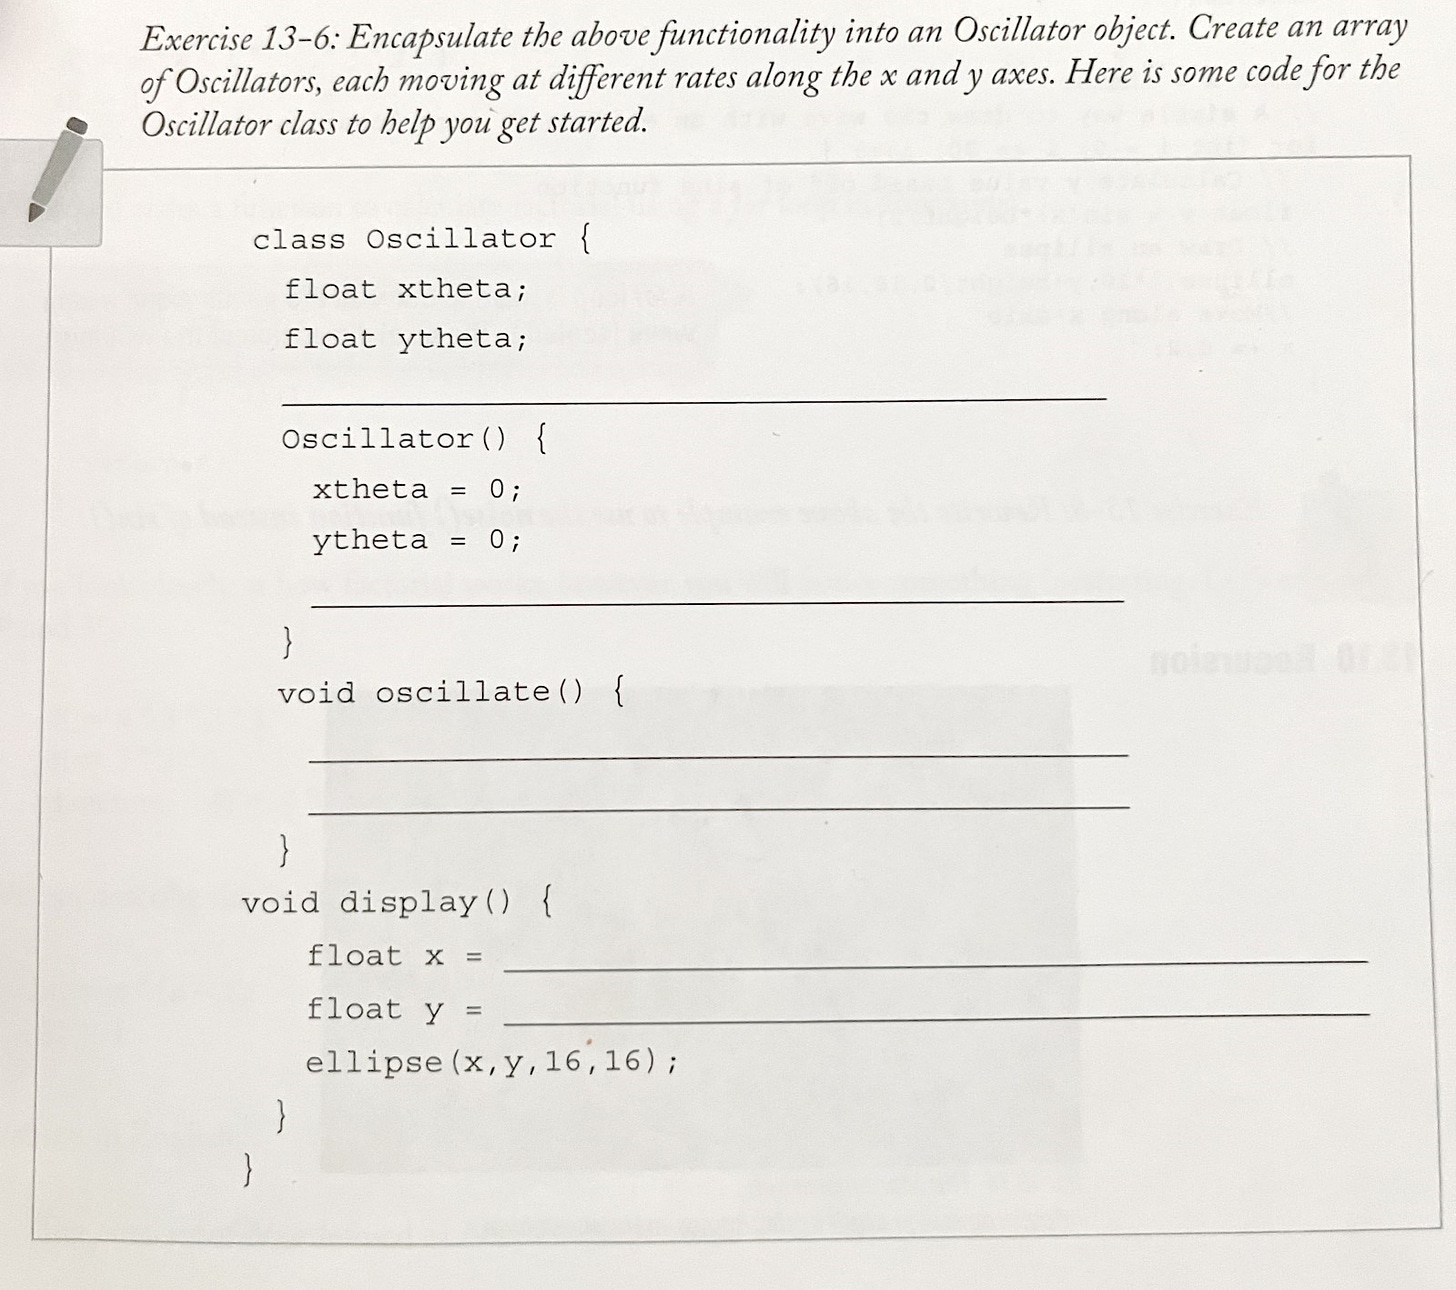 Photo of an Exercise from Daniel Shiffman’s Learning Proceesing showing a fill in the blank style of learning to program. 